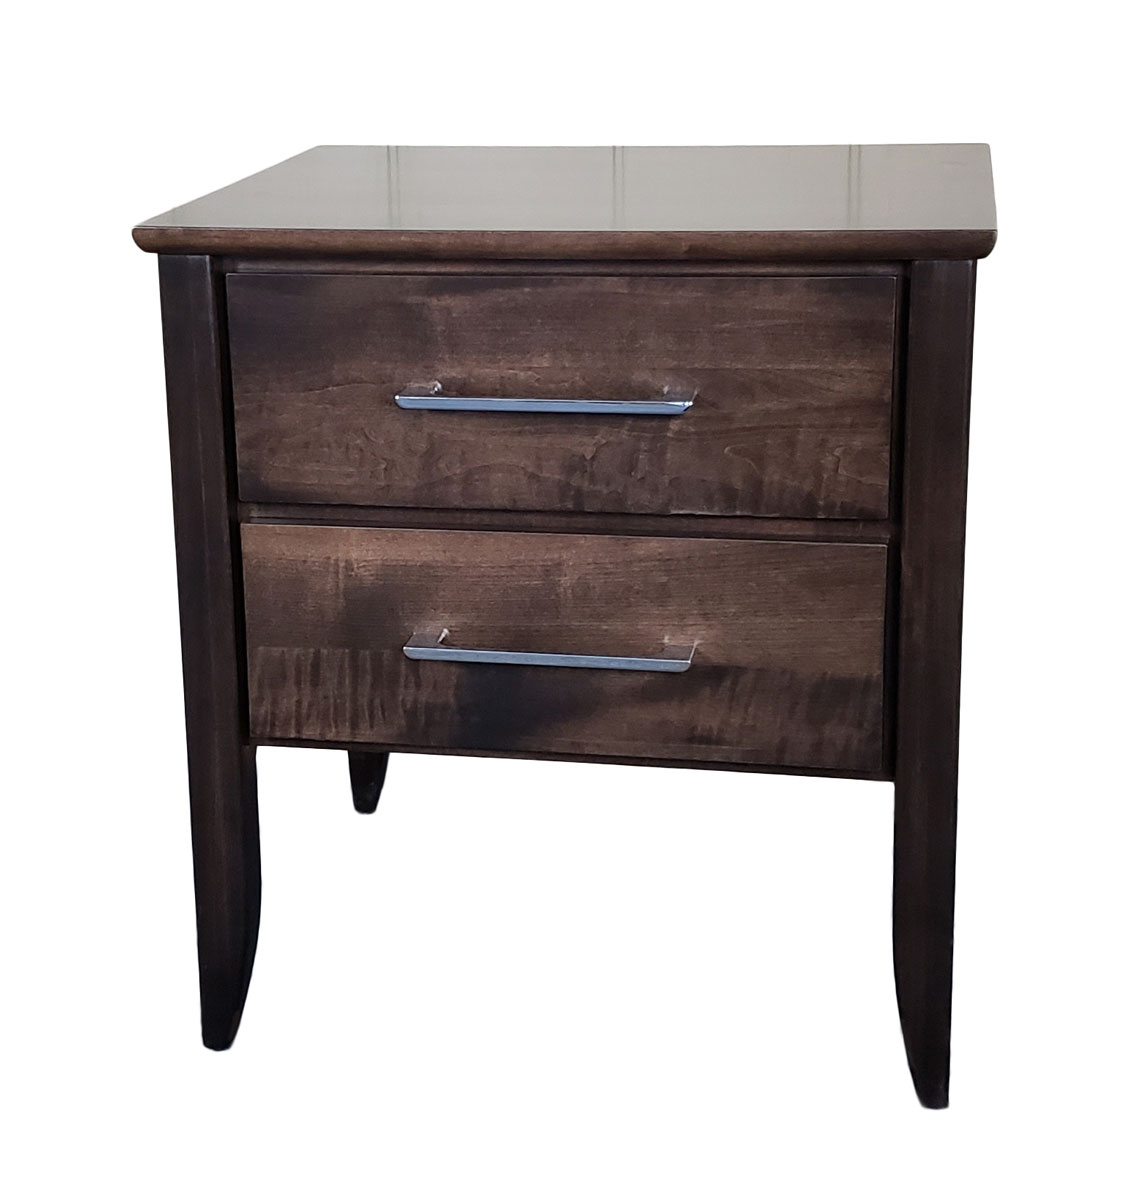 Ashland 2 Drawer Nightstand shown in Brown Maple with OCS-122 Cocoa